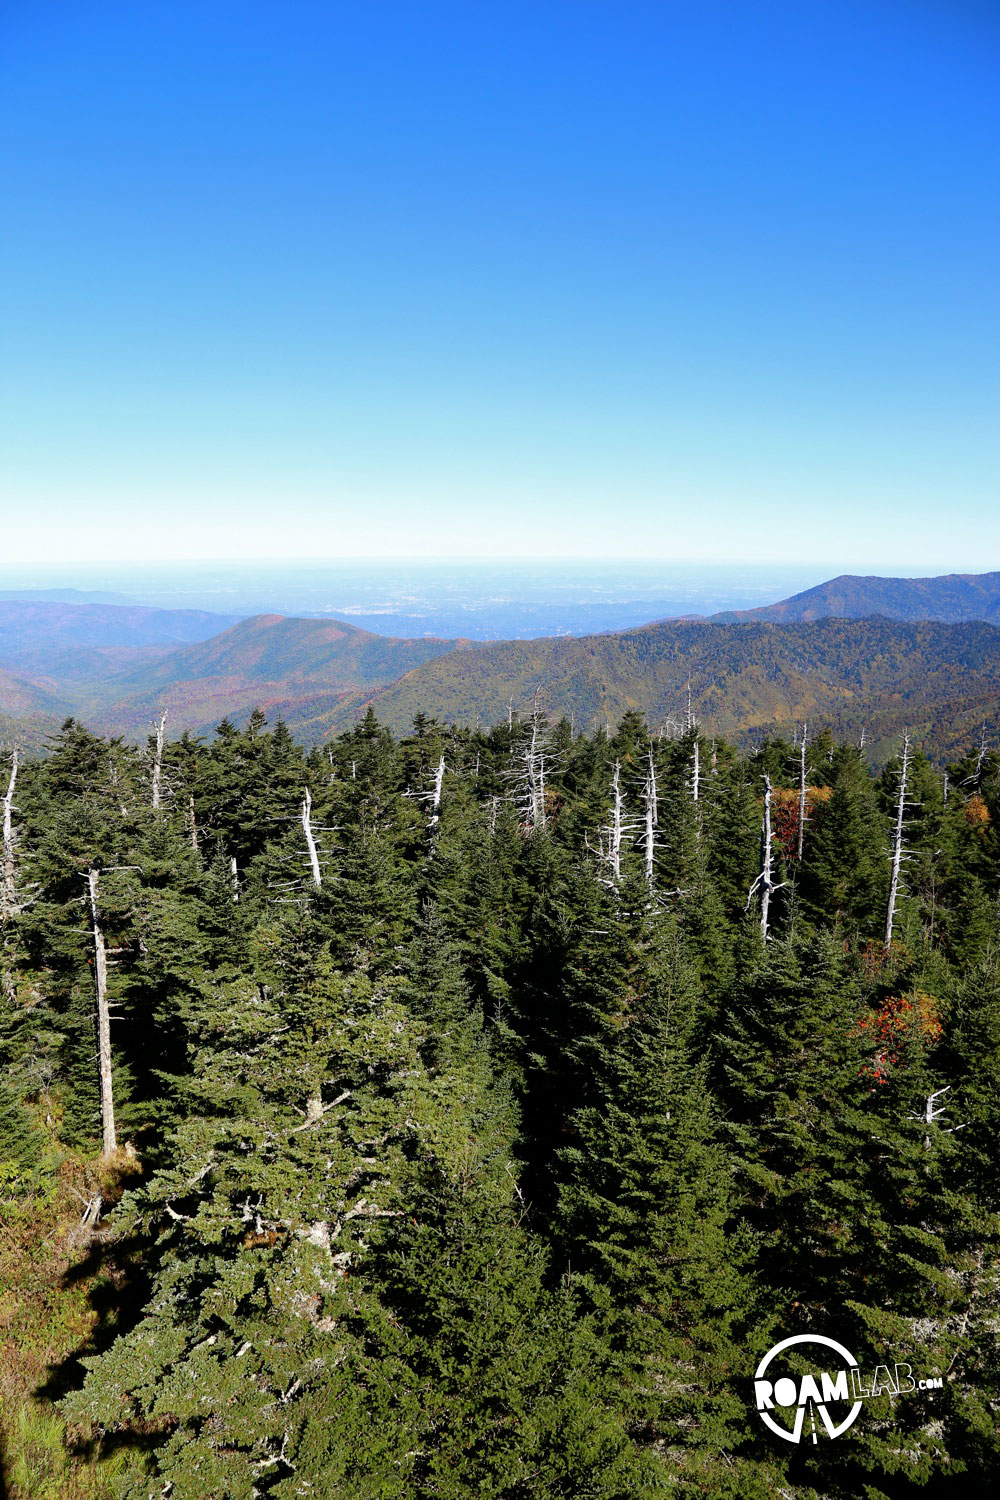 The hike to the top of Clingman's Dome may be steep but the end is an amazing vista of the Great Smoky Mountains National Park.